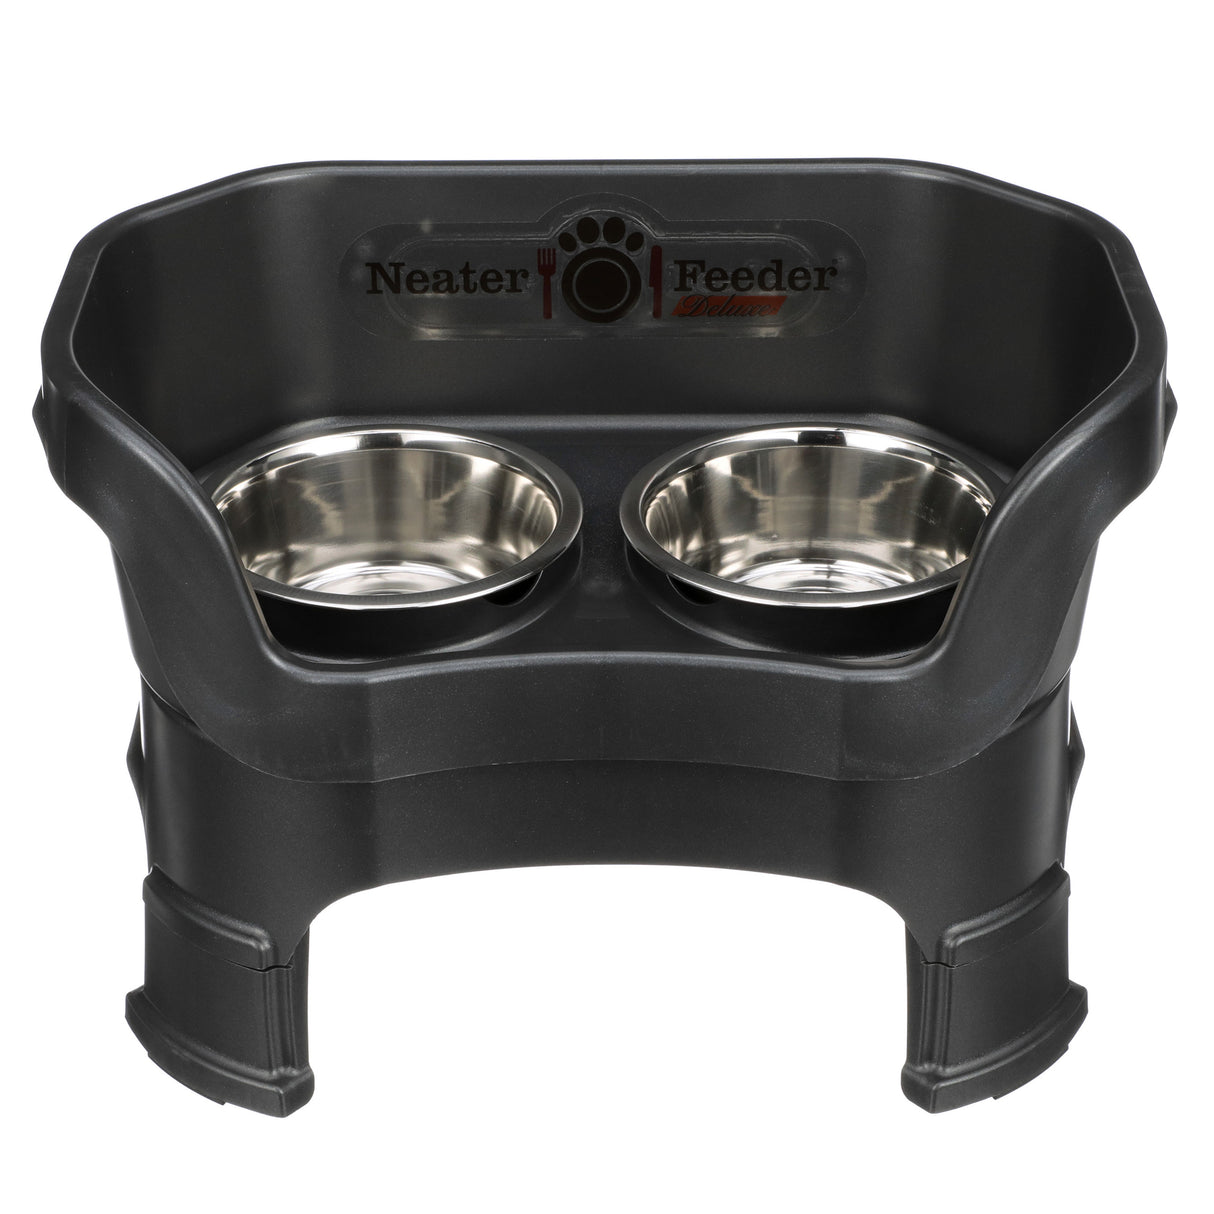 Deluxe Medium Dog Midnight Black raised Neater Feeder with leg extensions dog bowls